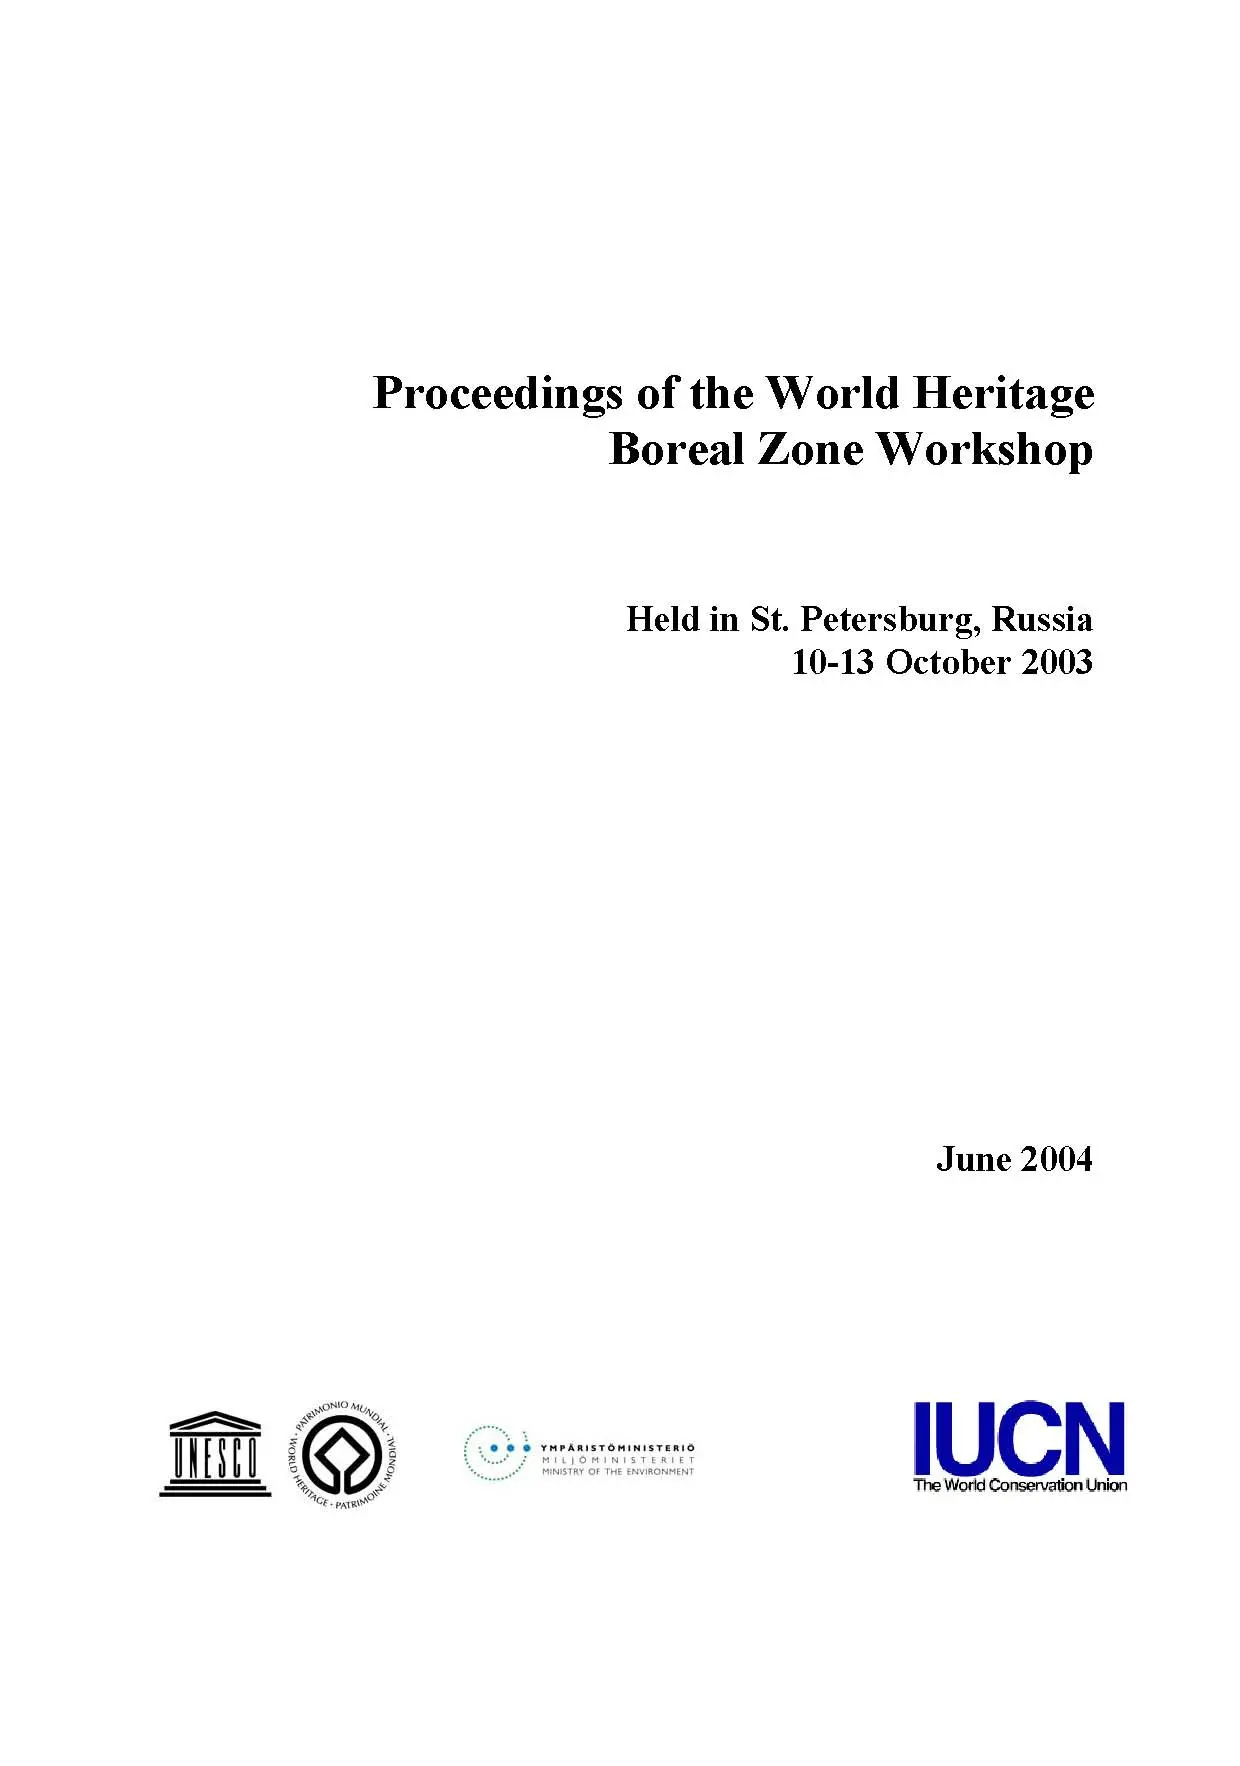 World Heritage in the Boreal Zone